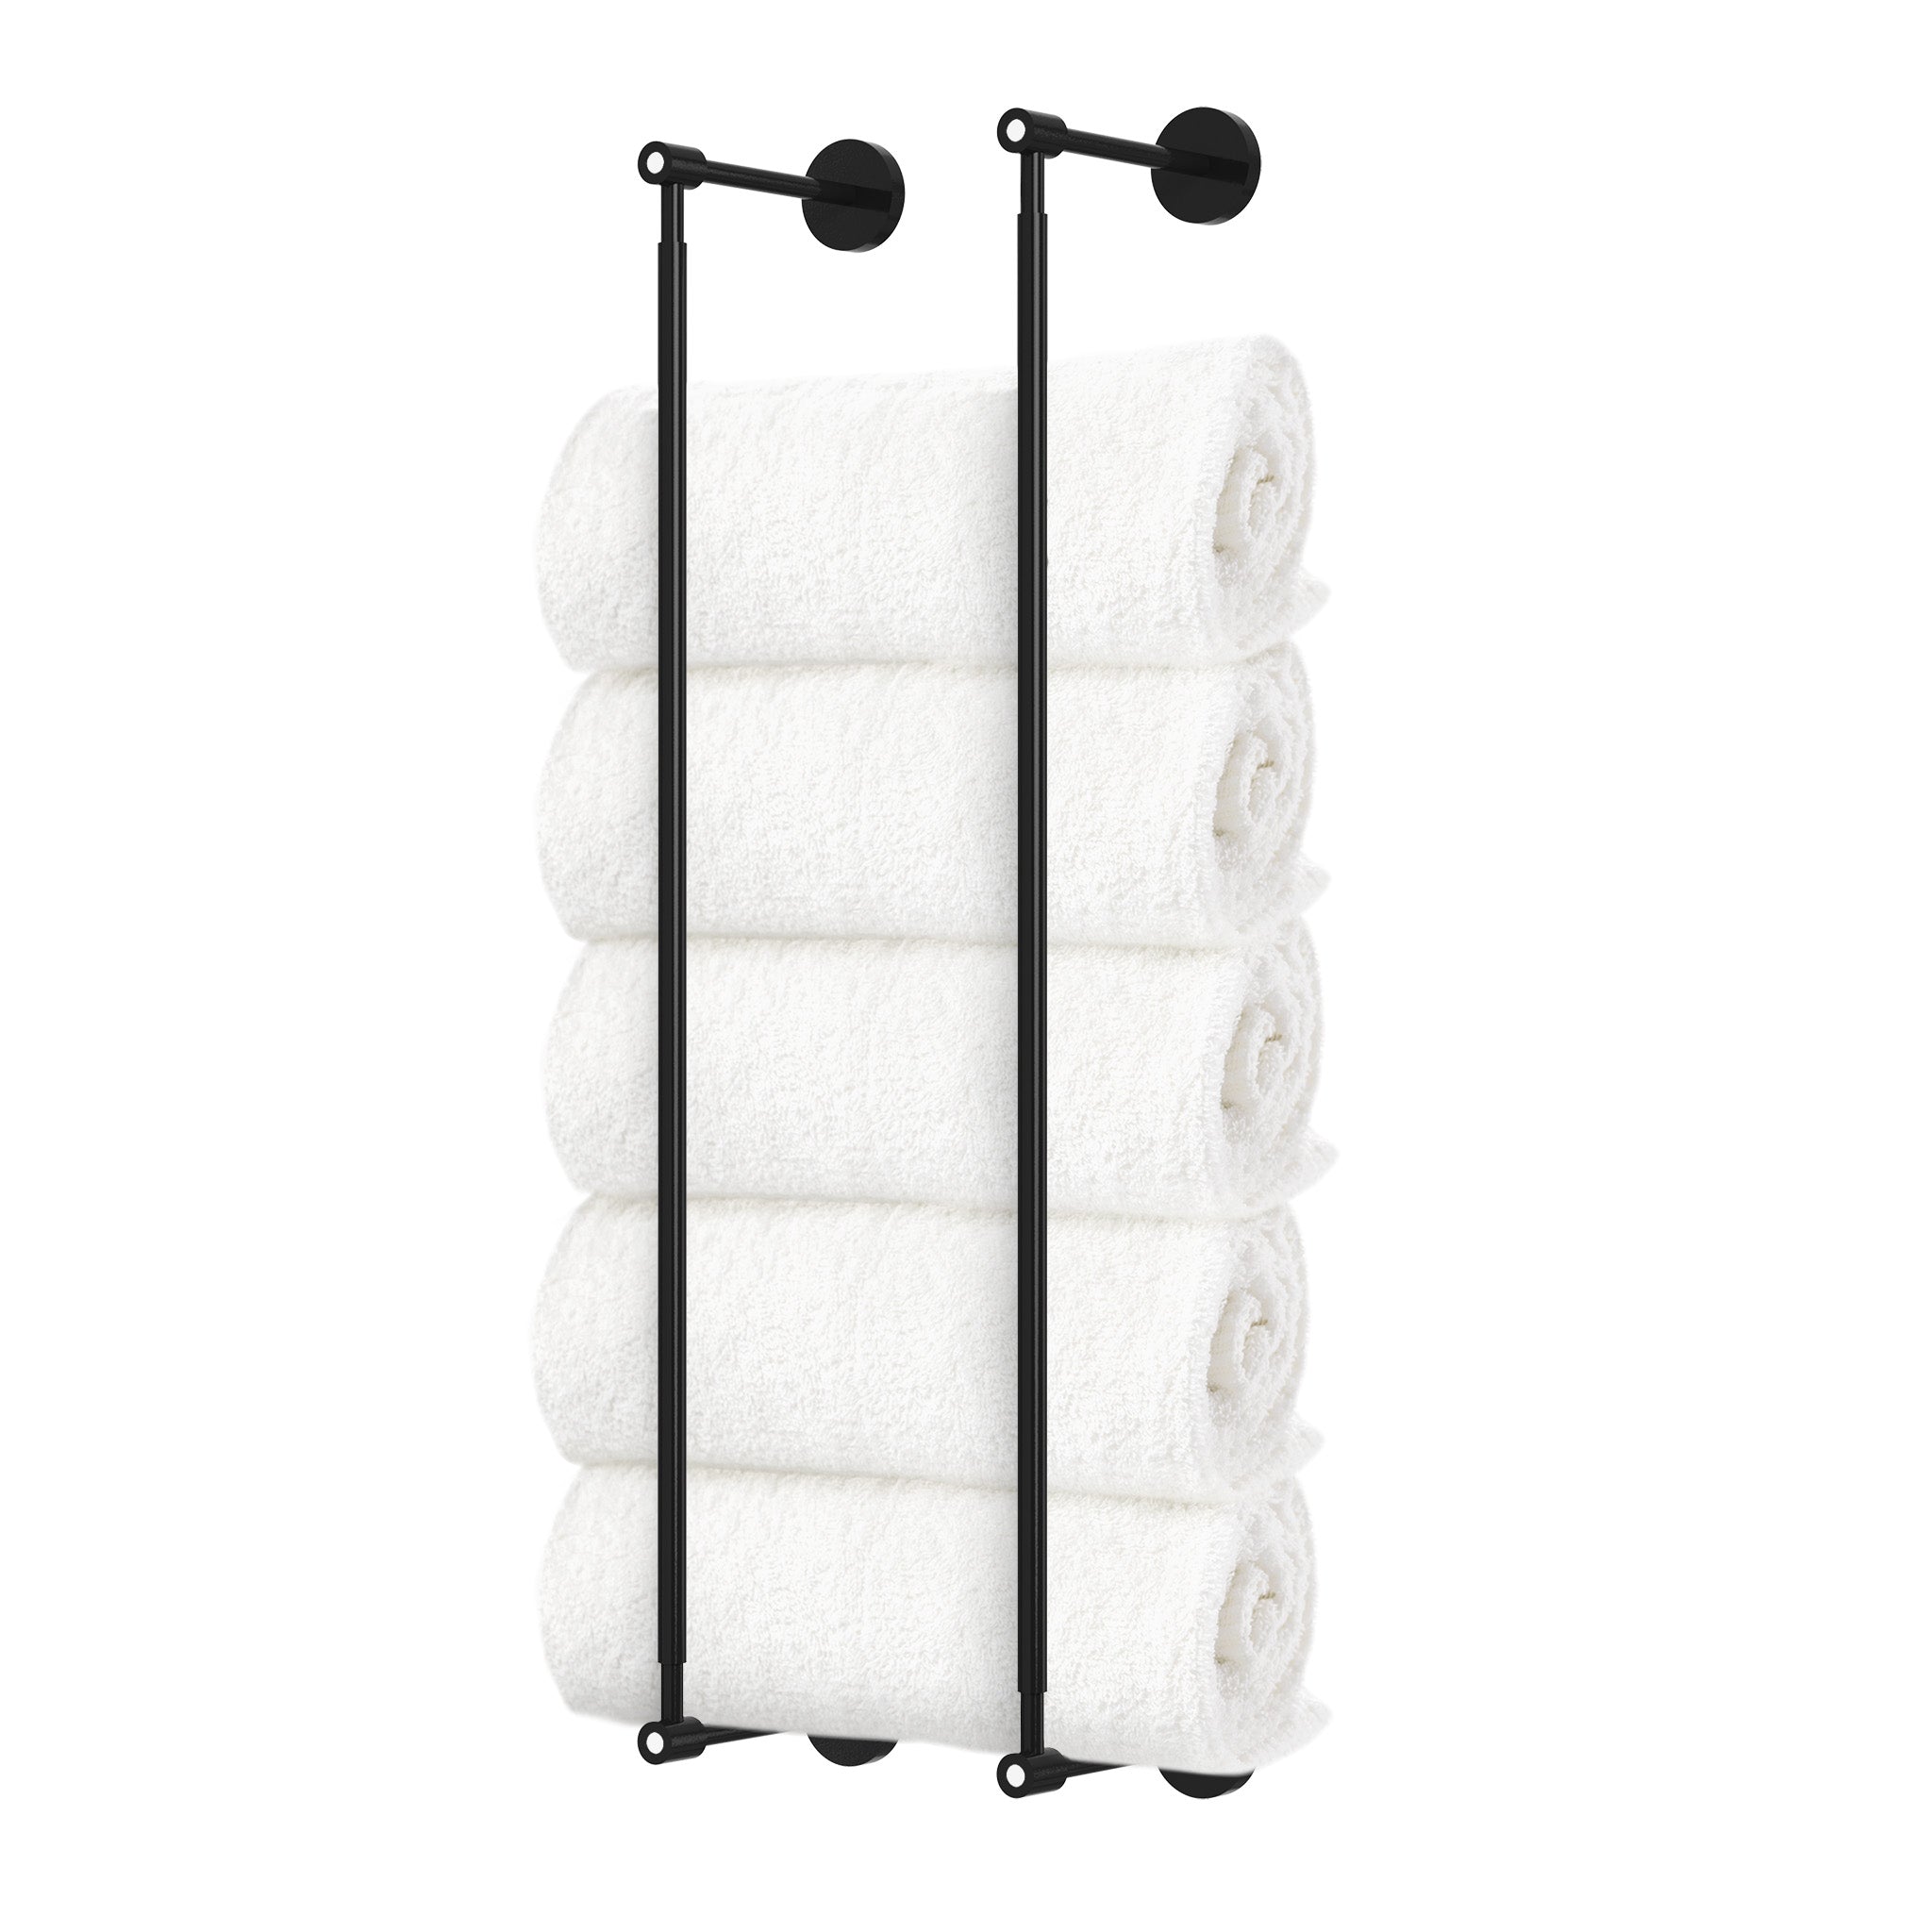 Black and white head towel rack 24 inch dutton brown hardware